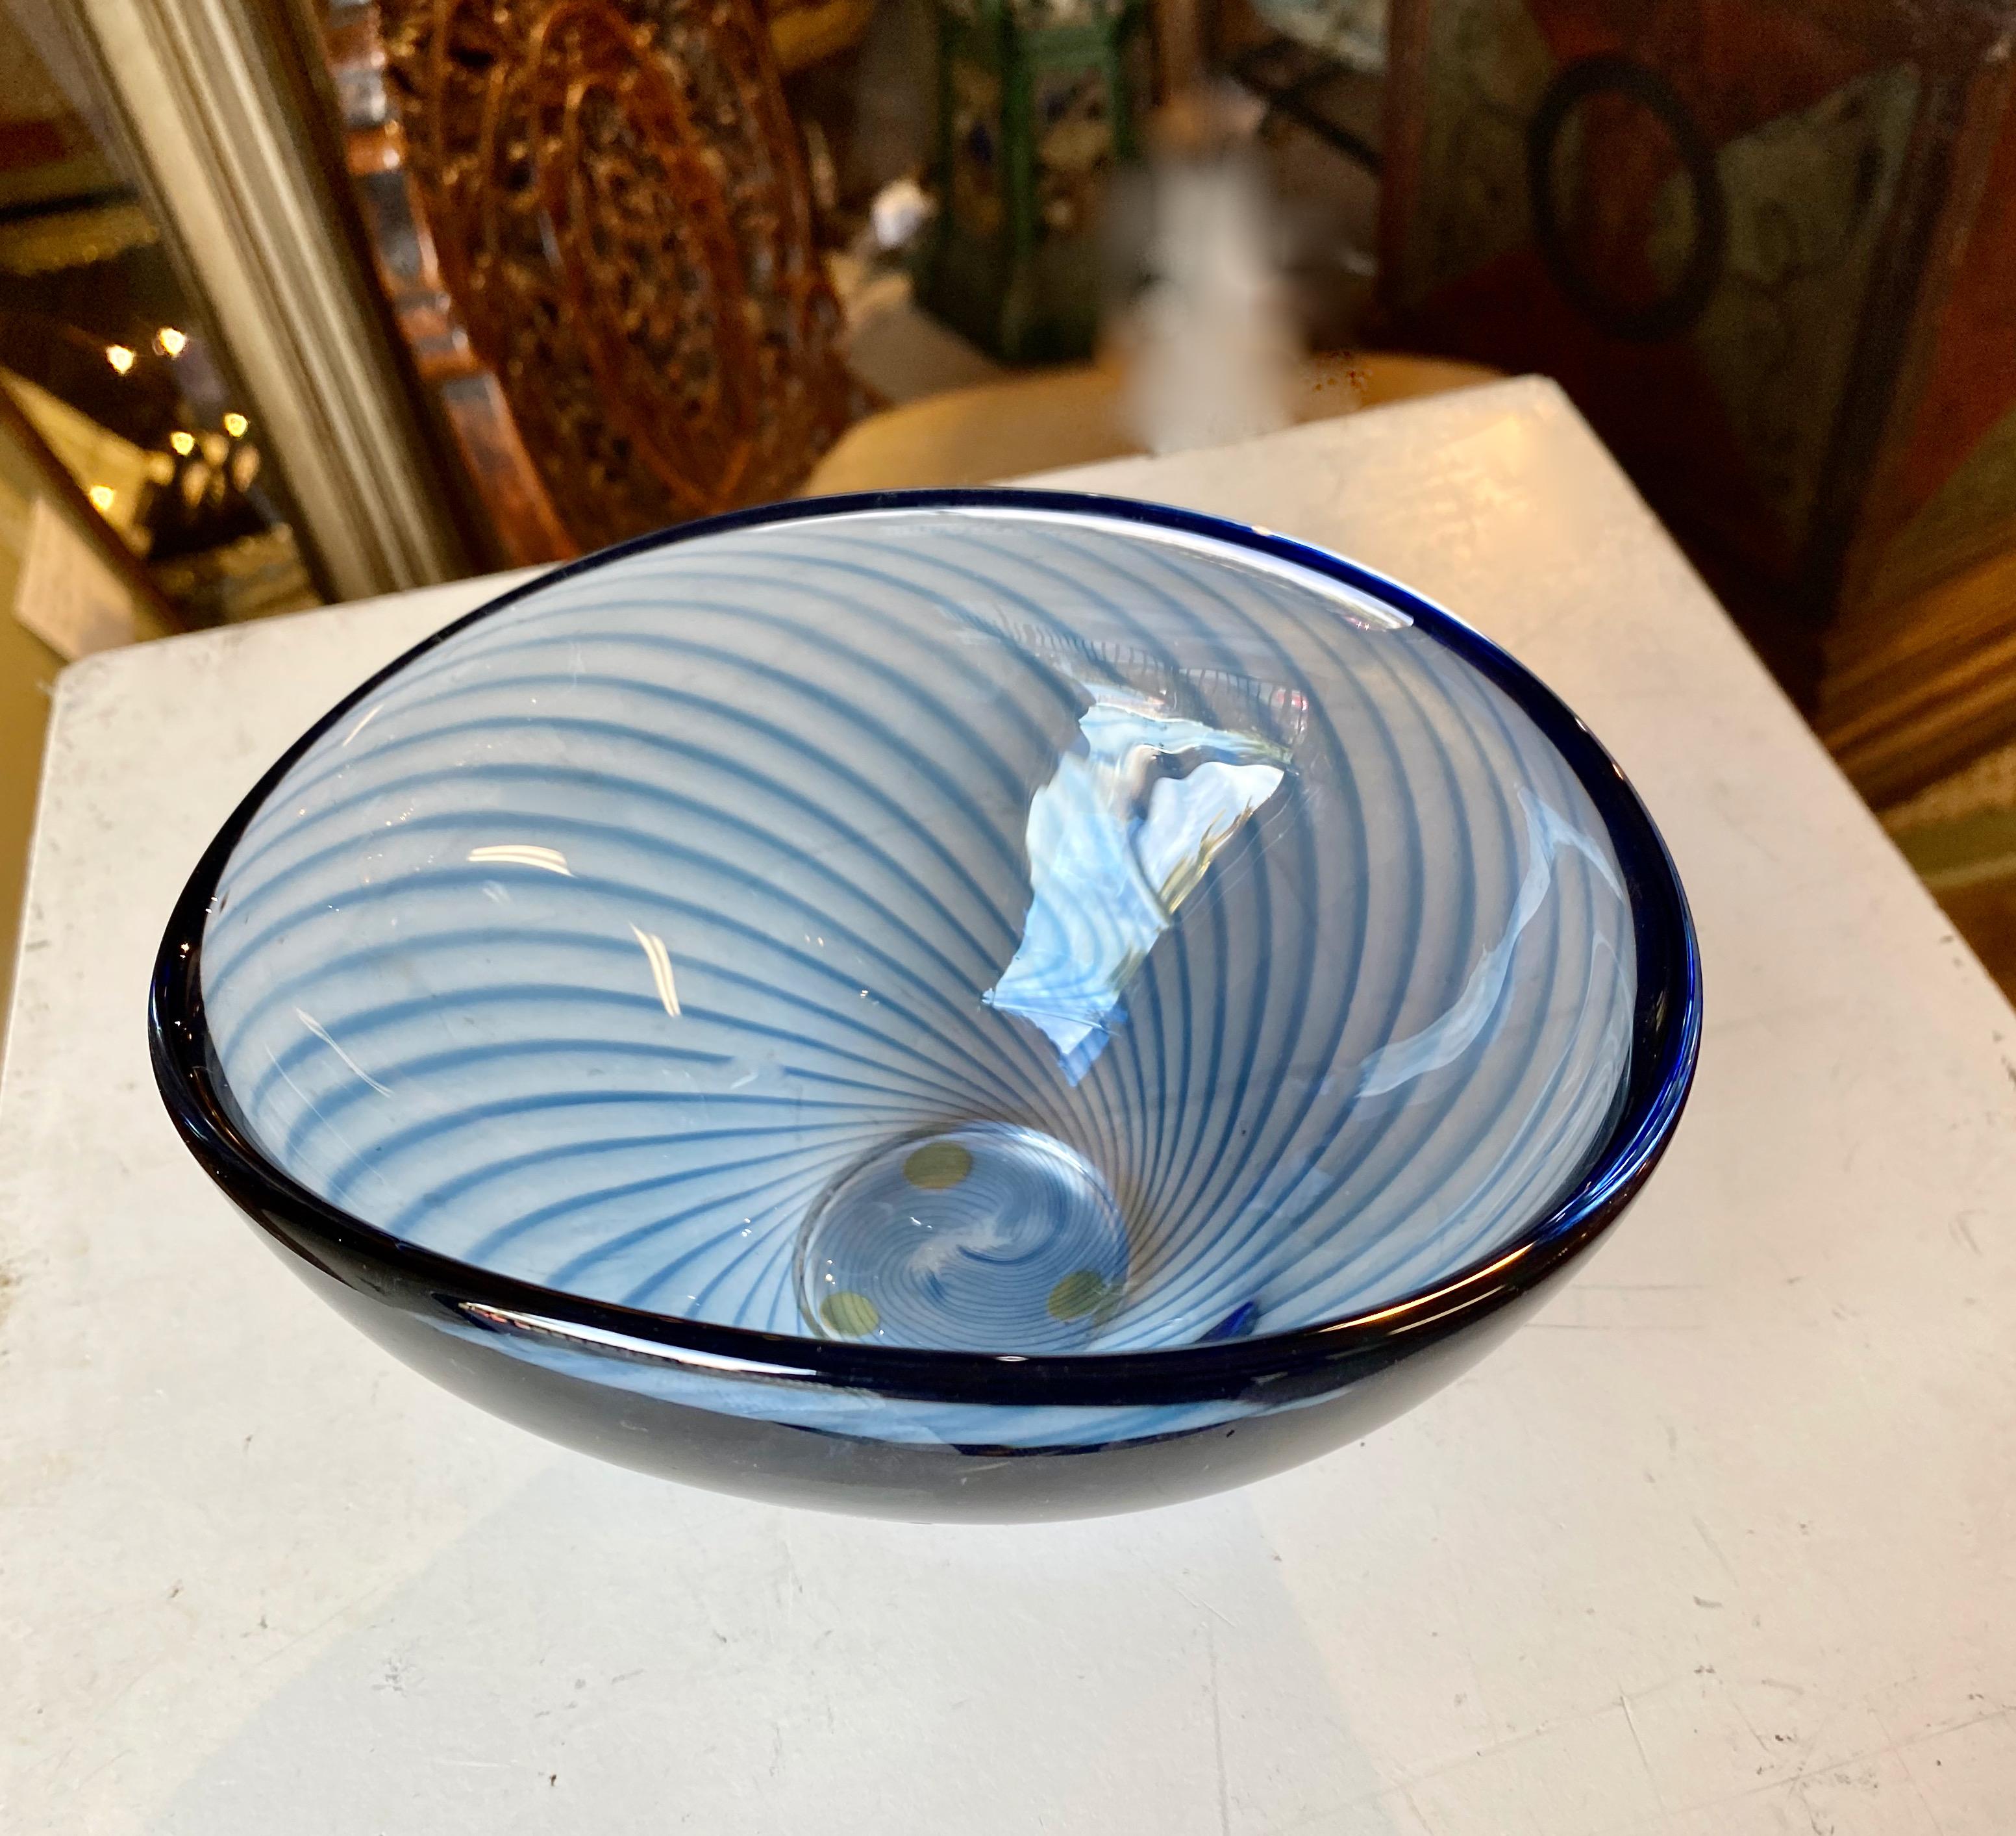 This is a beautiful mouth blown filigrana glass bowl whose design is attributed to Vicke Lindstrom for Kosta Boda. The bowl is of exceptional quality and is created in a stunning vibrant blue glass with filigrana detailing in a darker blue. Art